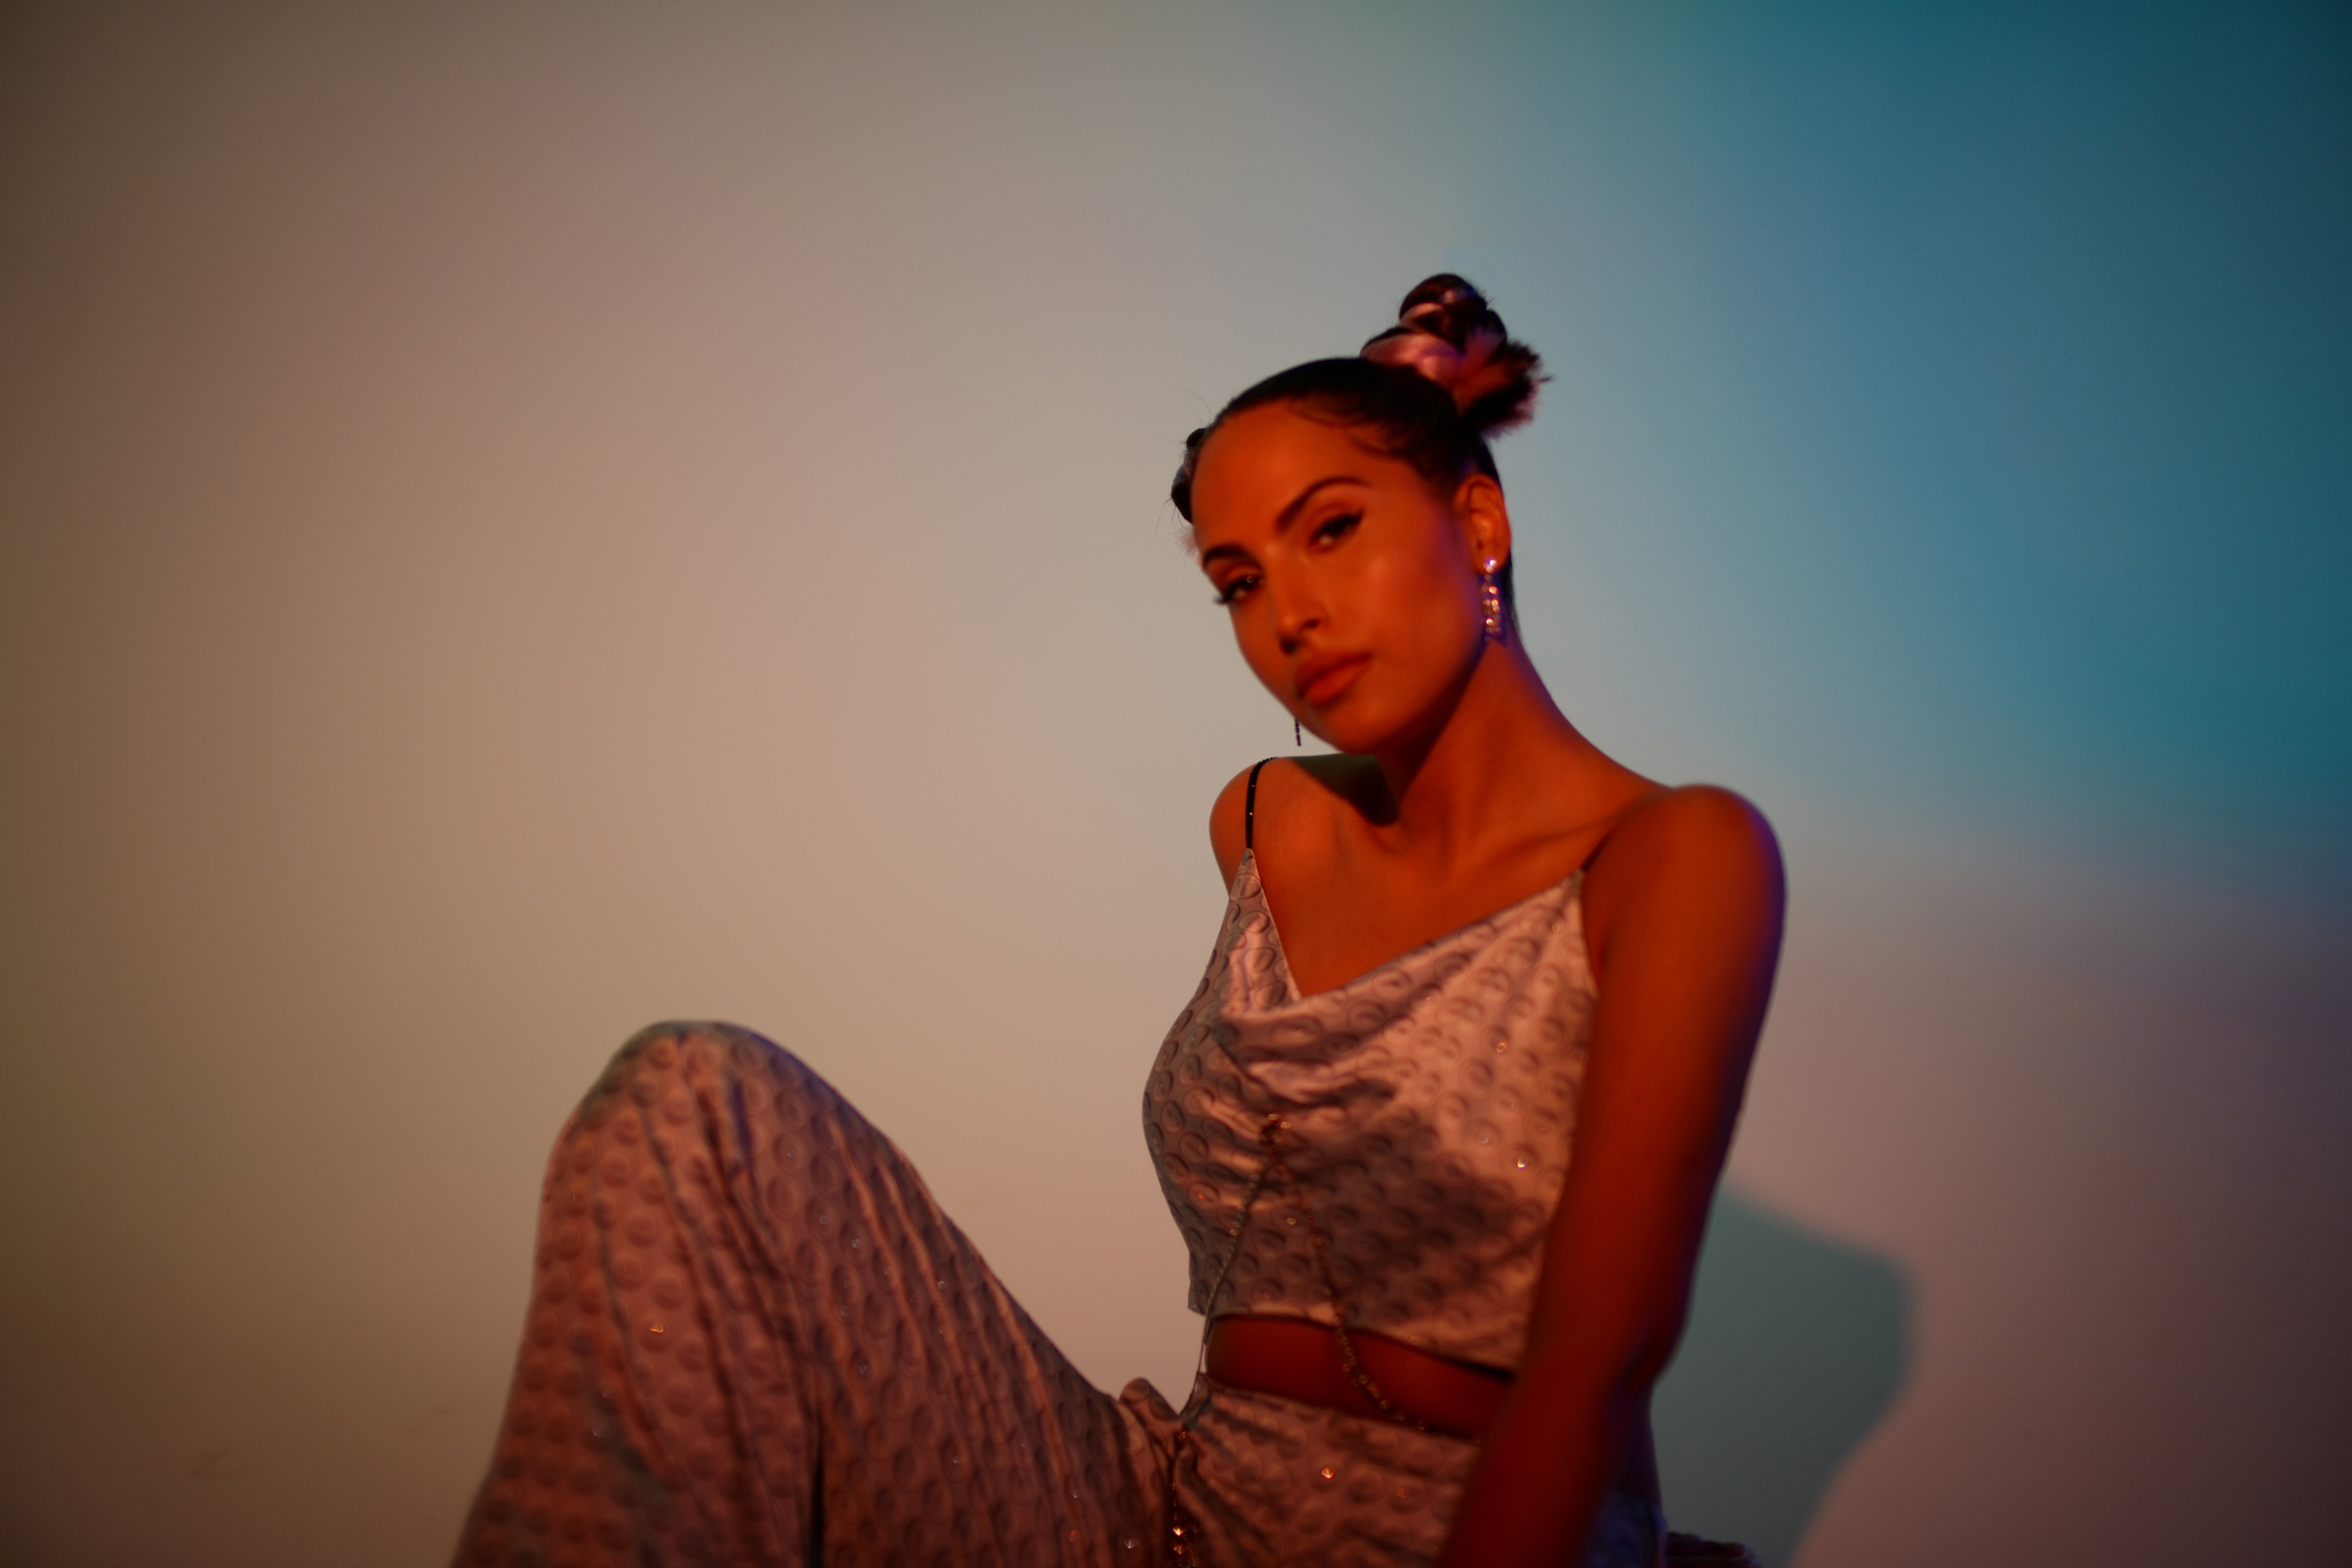 Snoh Aalegra's New Track & Video for 